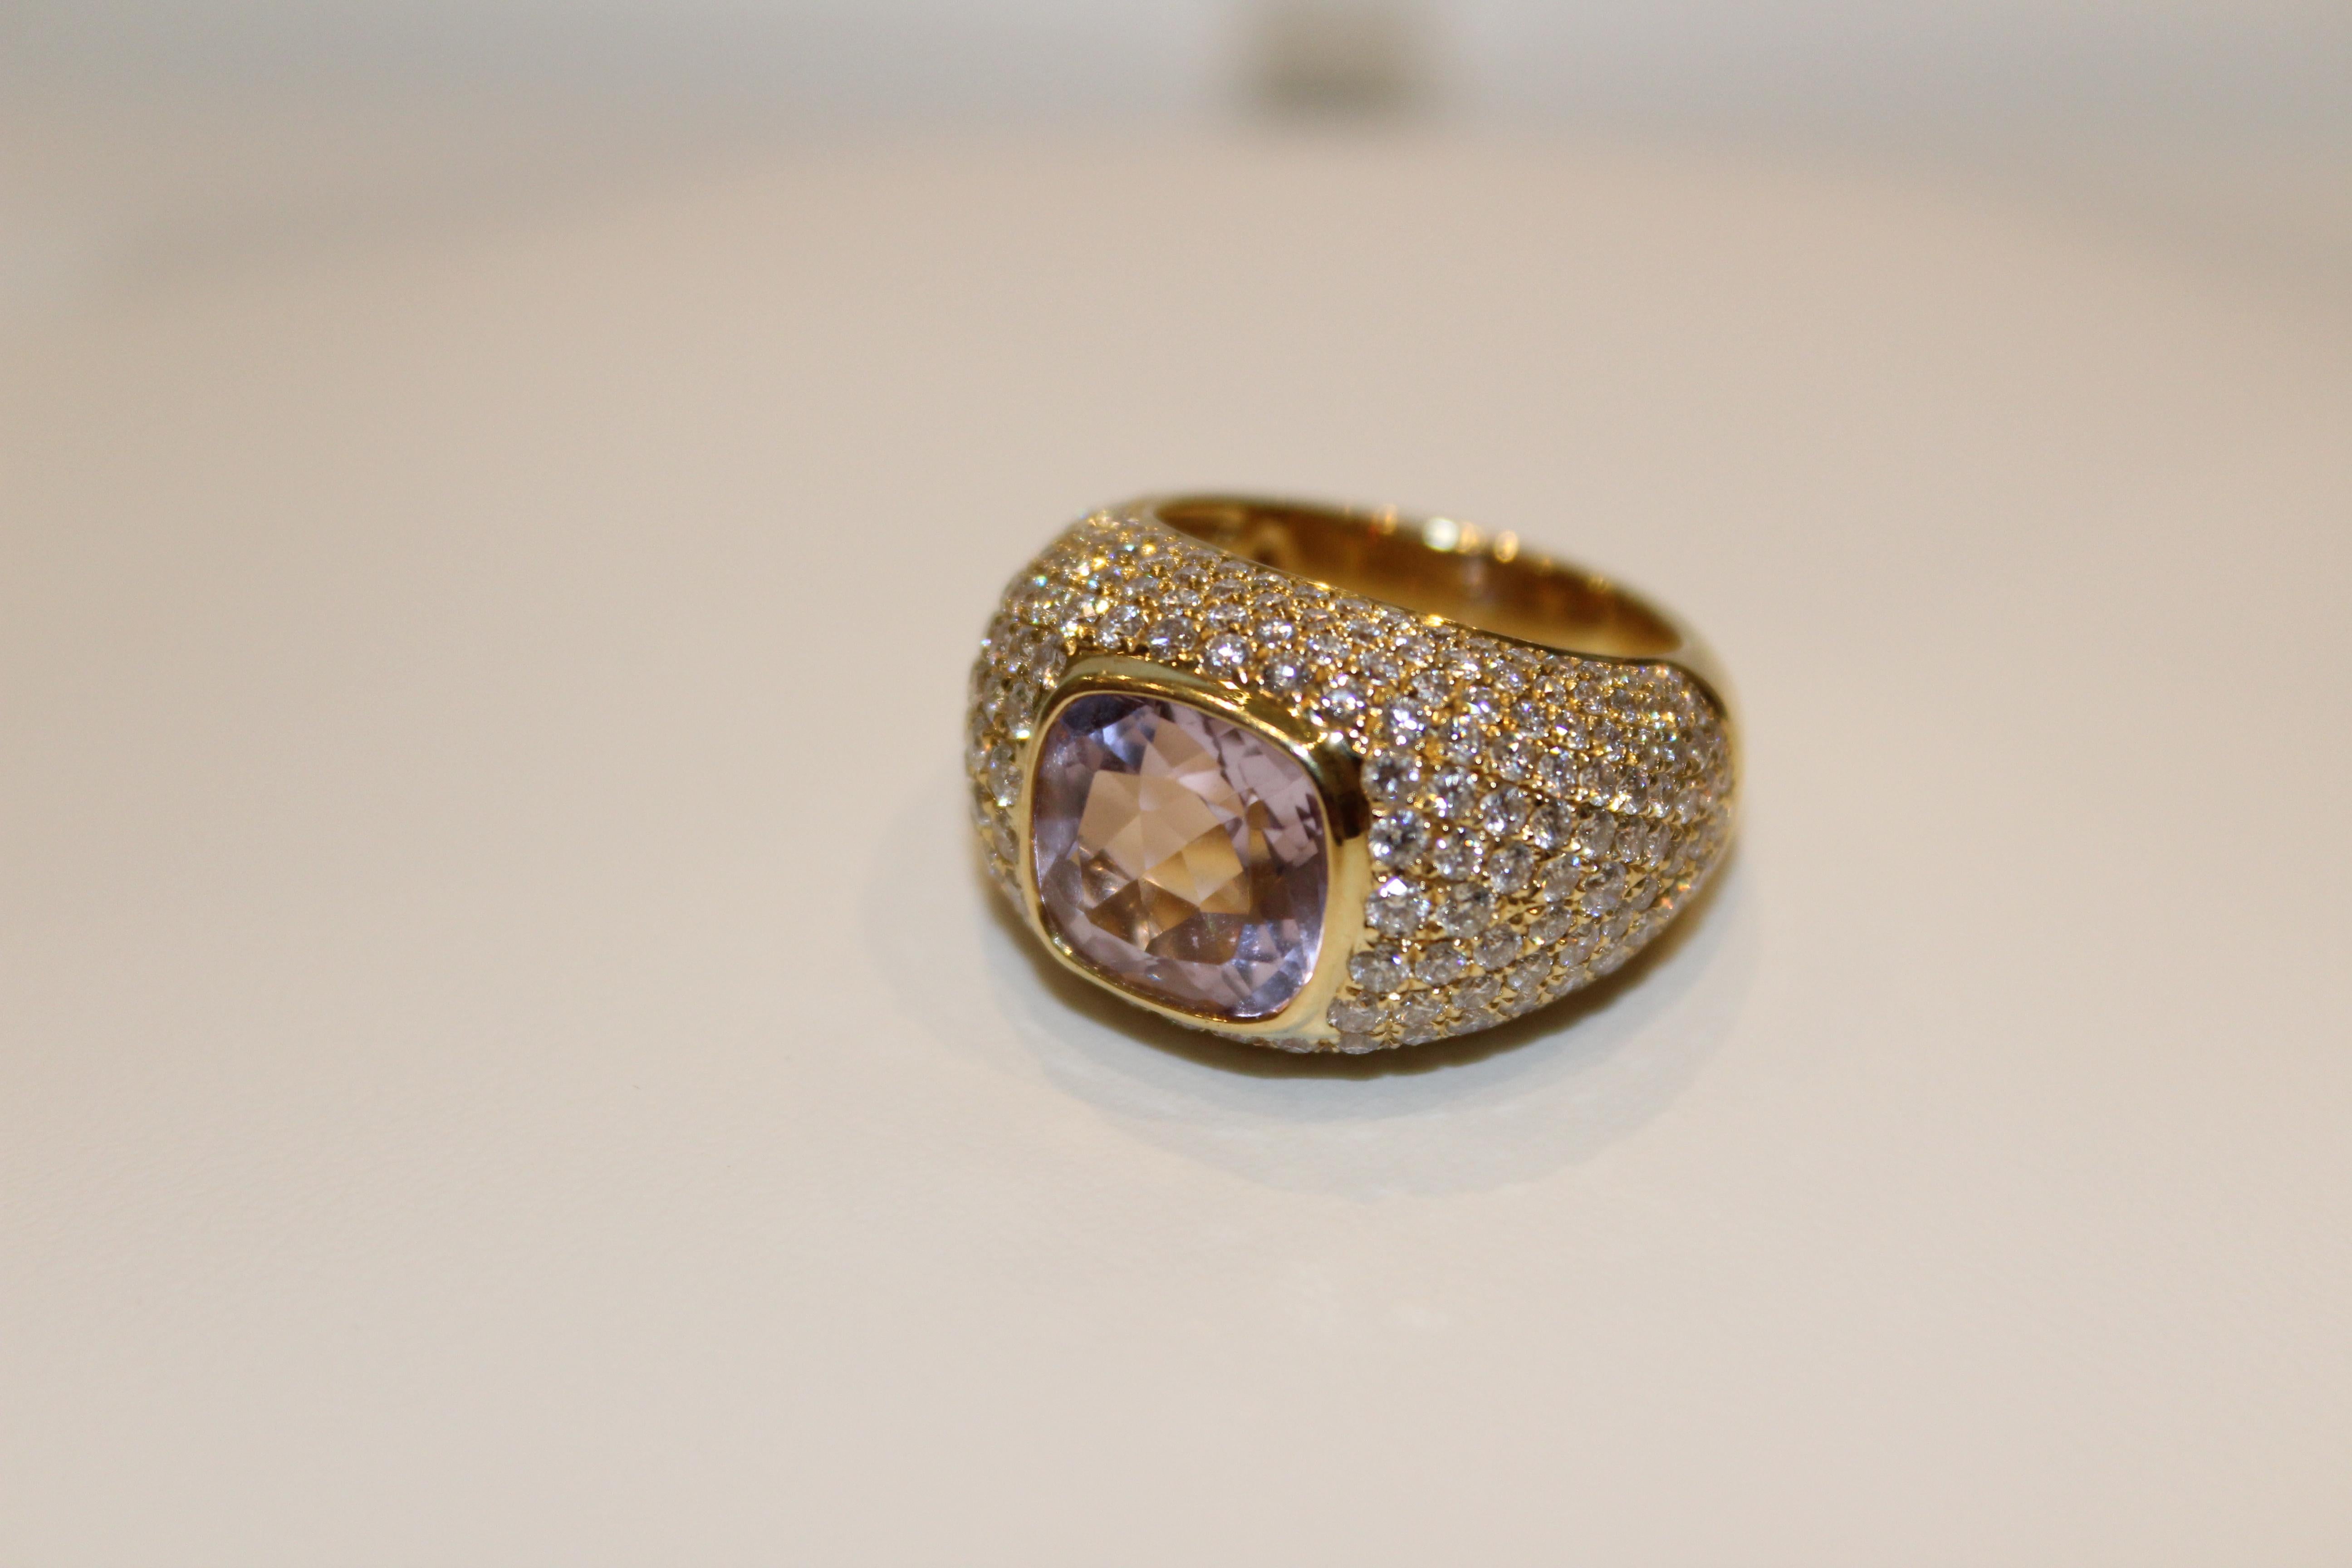 This dazzling statement ring features a central cushion-cut Lavender Amethyst ring set in 18ct Yellow Gold, surrounded by multiple rows of Pave Diamonds. The resulting ring is a statement piece that would look beautiful with an evening gown or as an